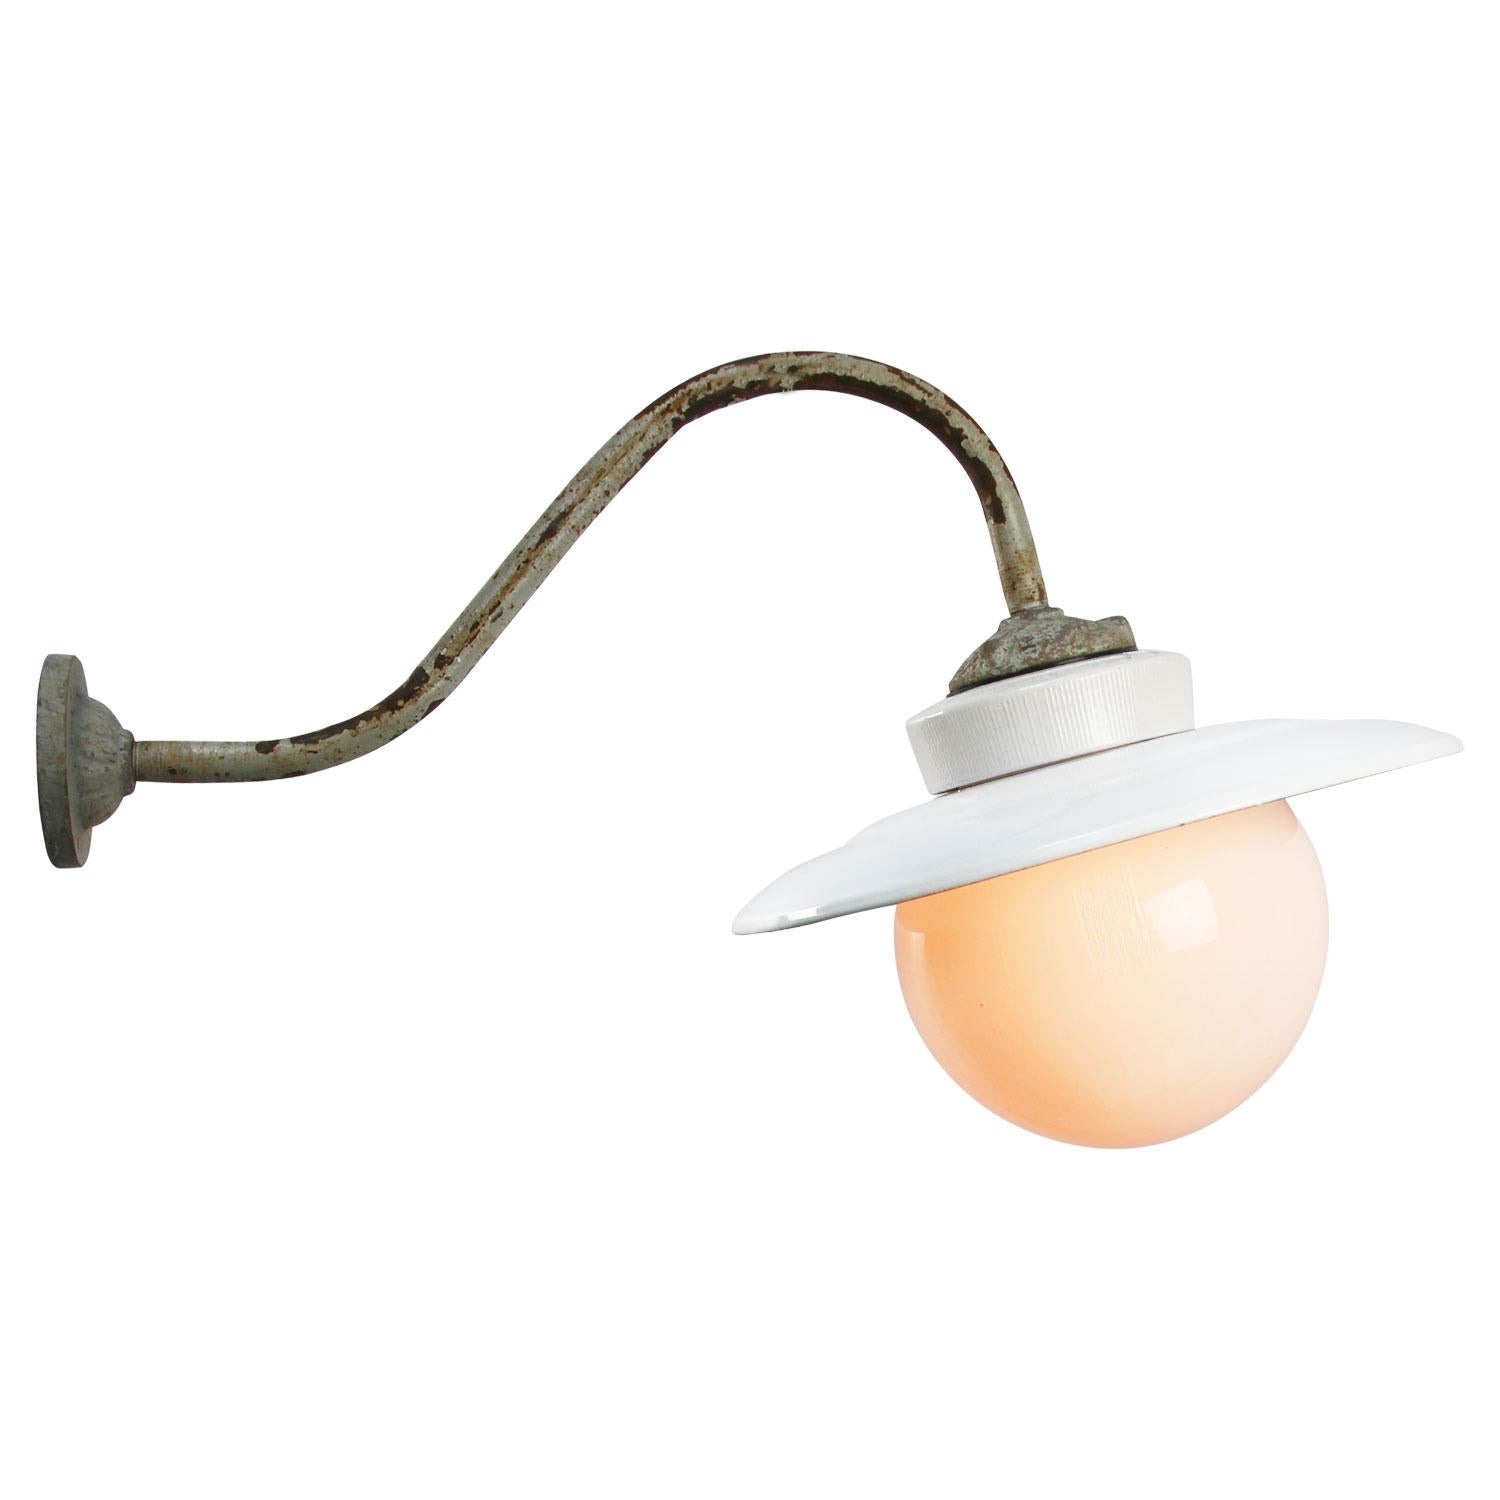 White enamel industrial wall light with white interior.
Cast iron and porcelain top, opaline glass.
Diameter cast iron wall mount: 9 cm, 3 holes to secure.

Weight: 2.10 kg / 4.6 lb

Priced per individual item. All lamps have been made